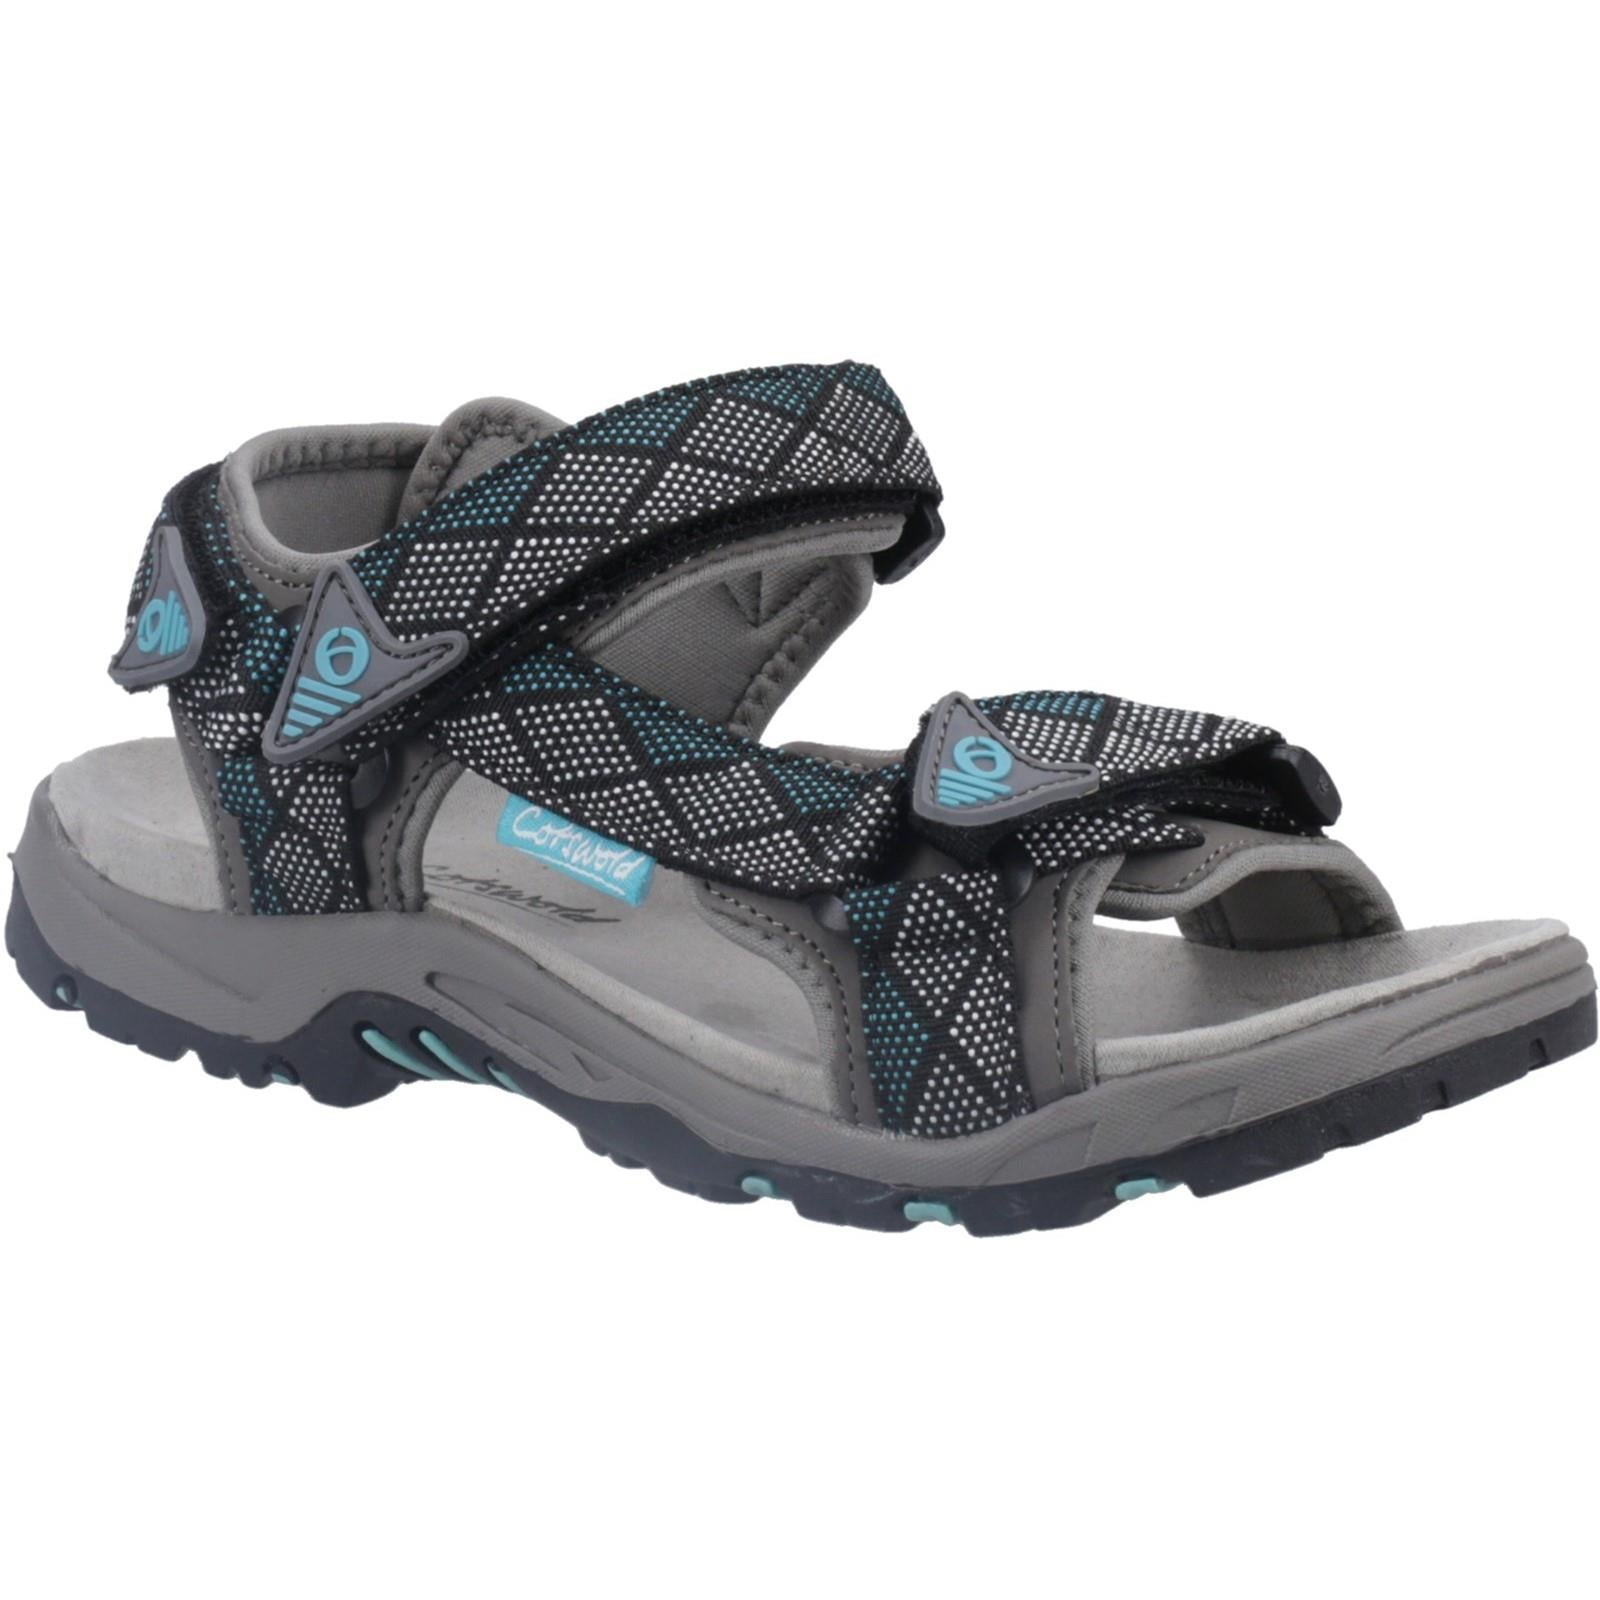 Cotswold Foxcote ladies grey/turquoise summer touch fastening walking sandals